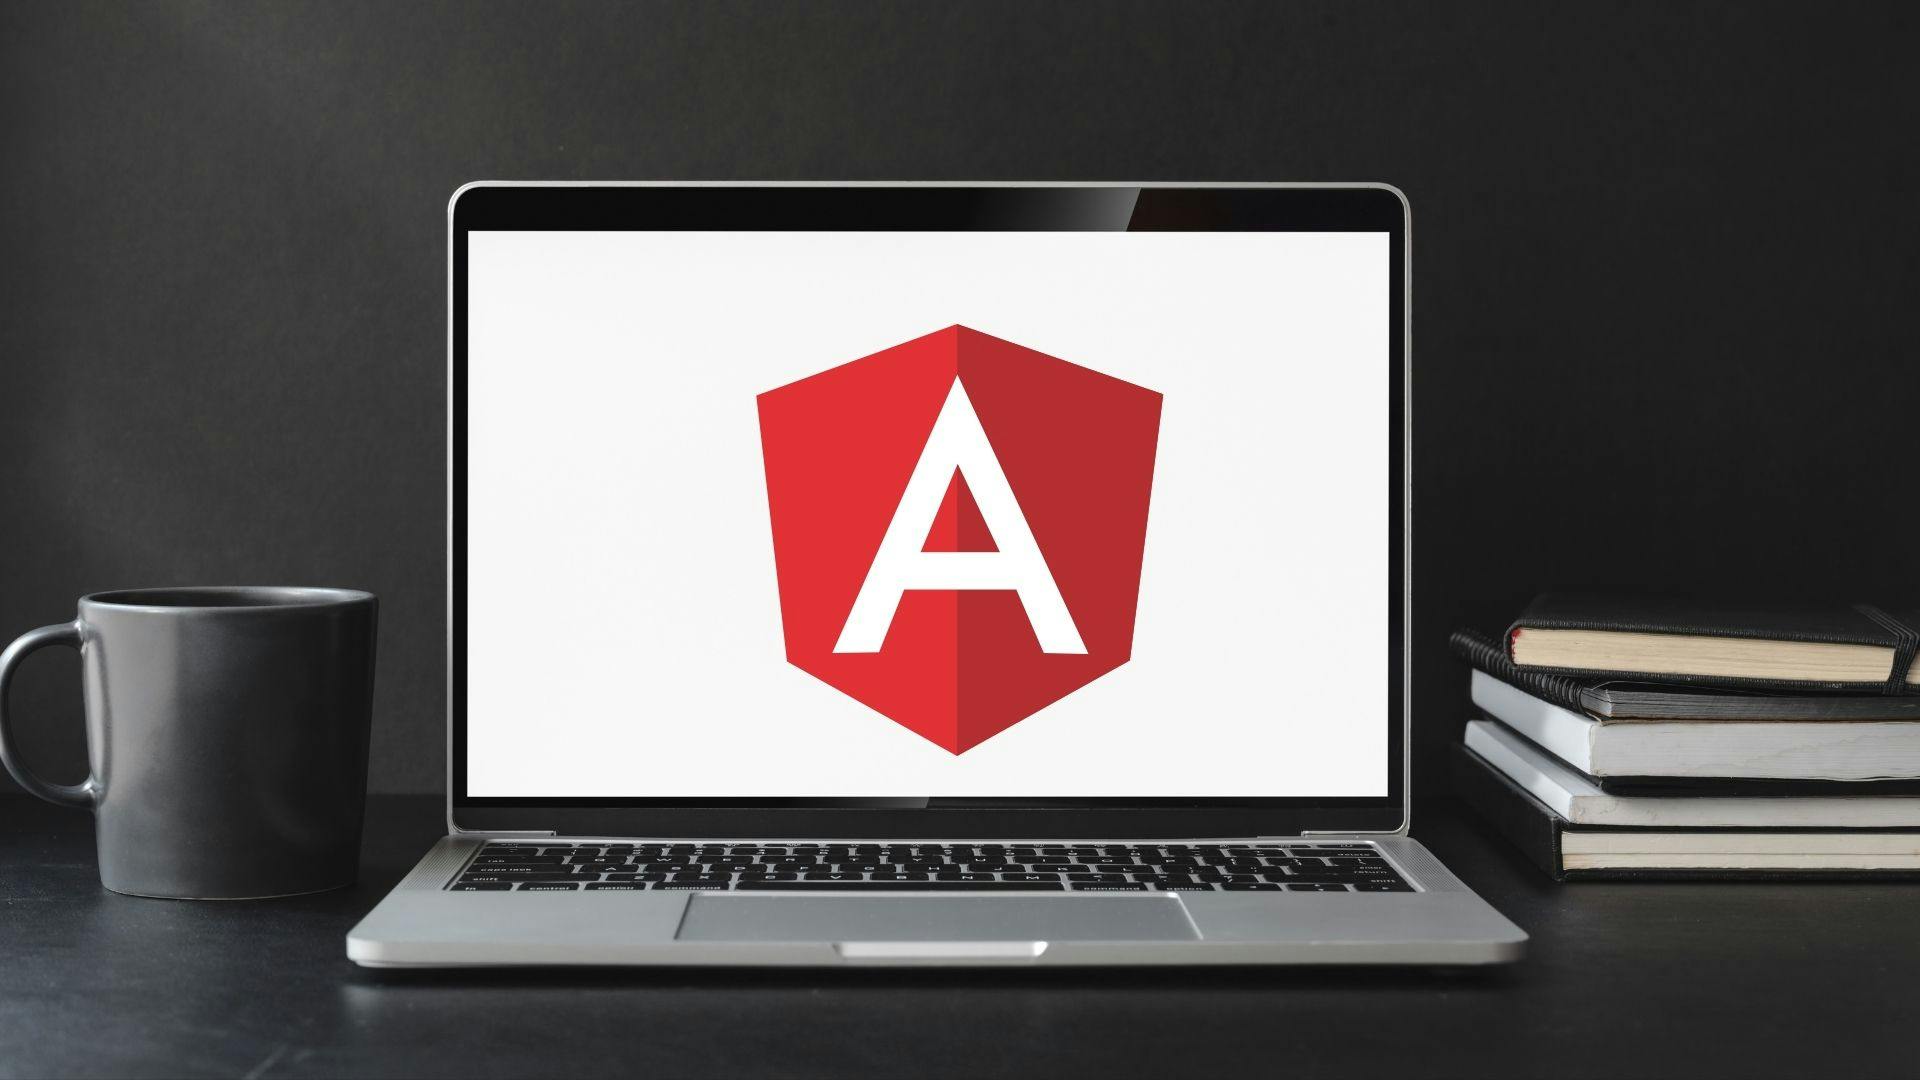 How does an Angular App works in a web browser?